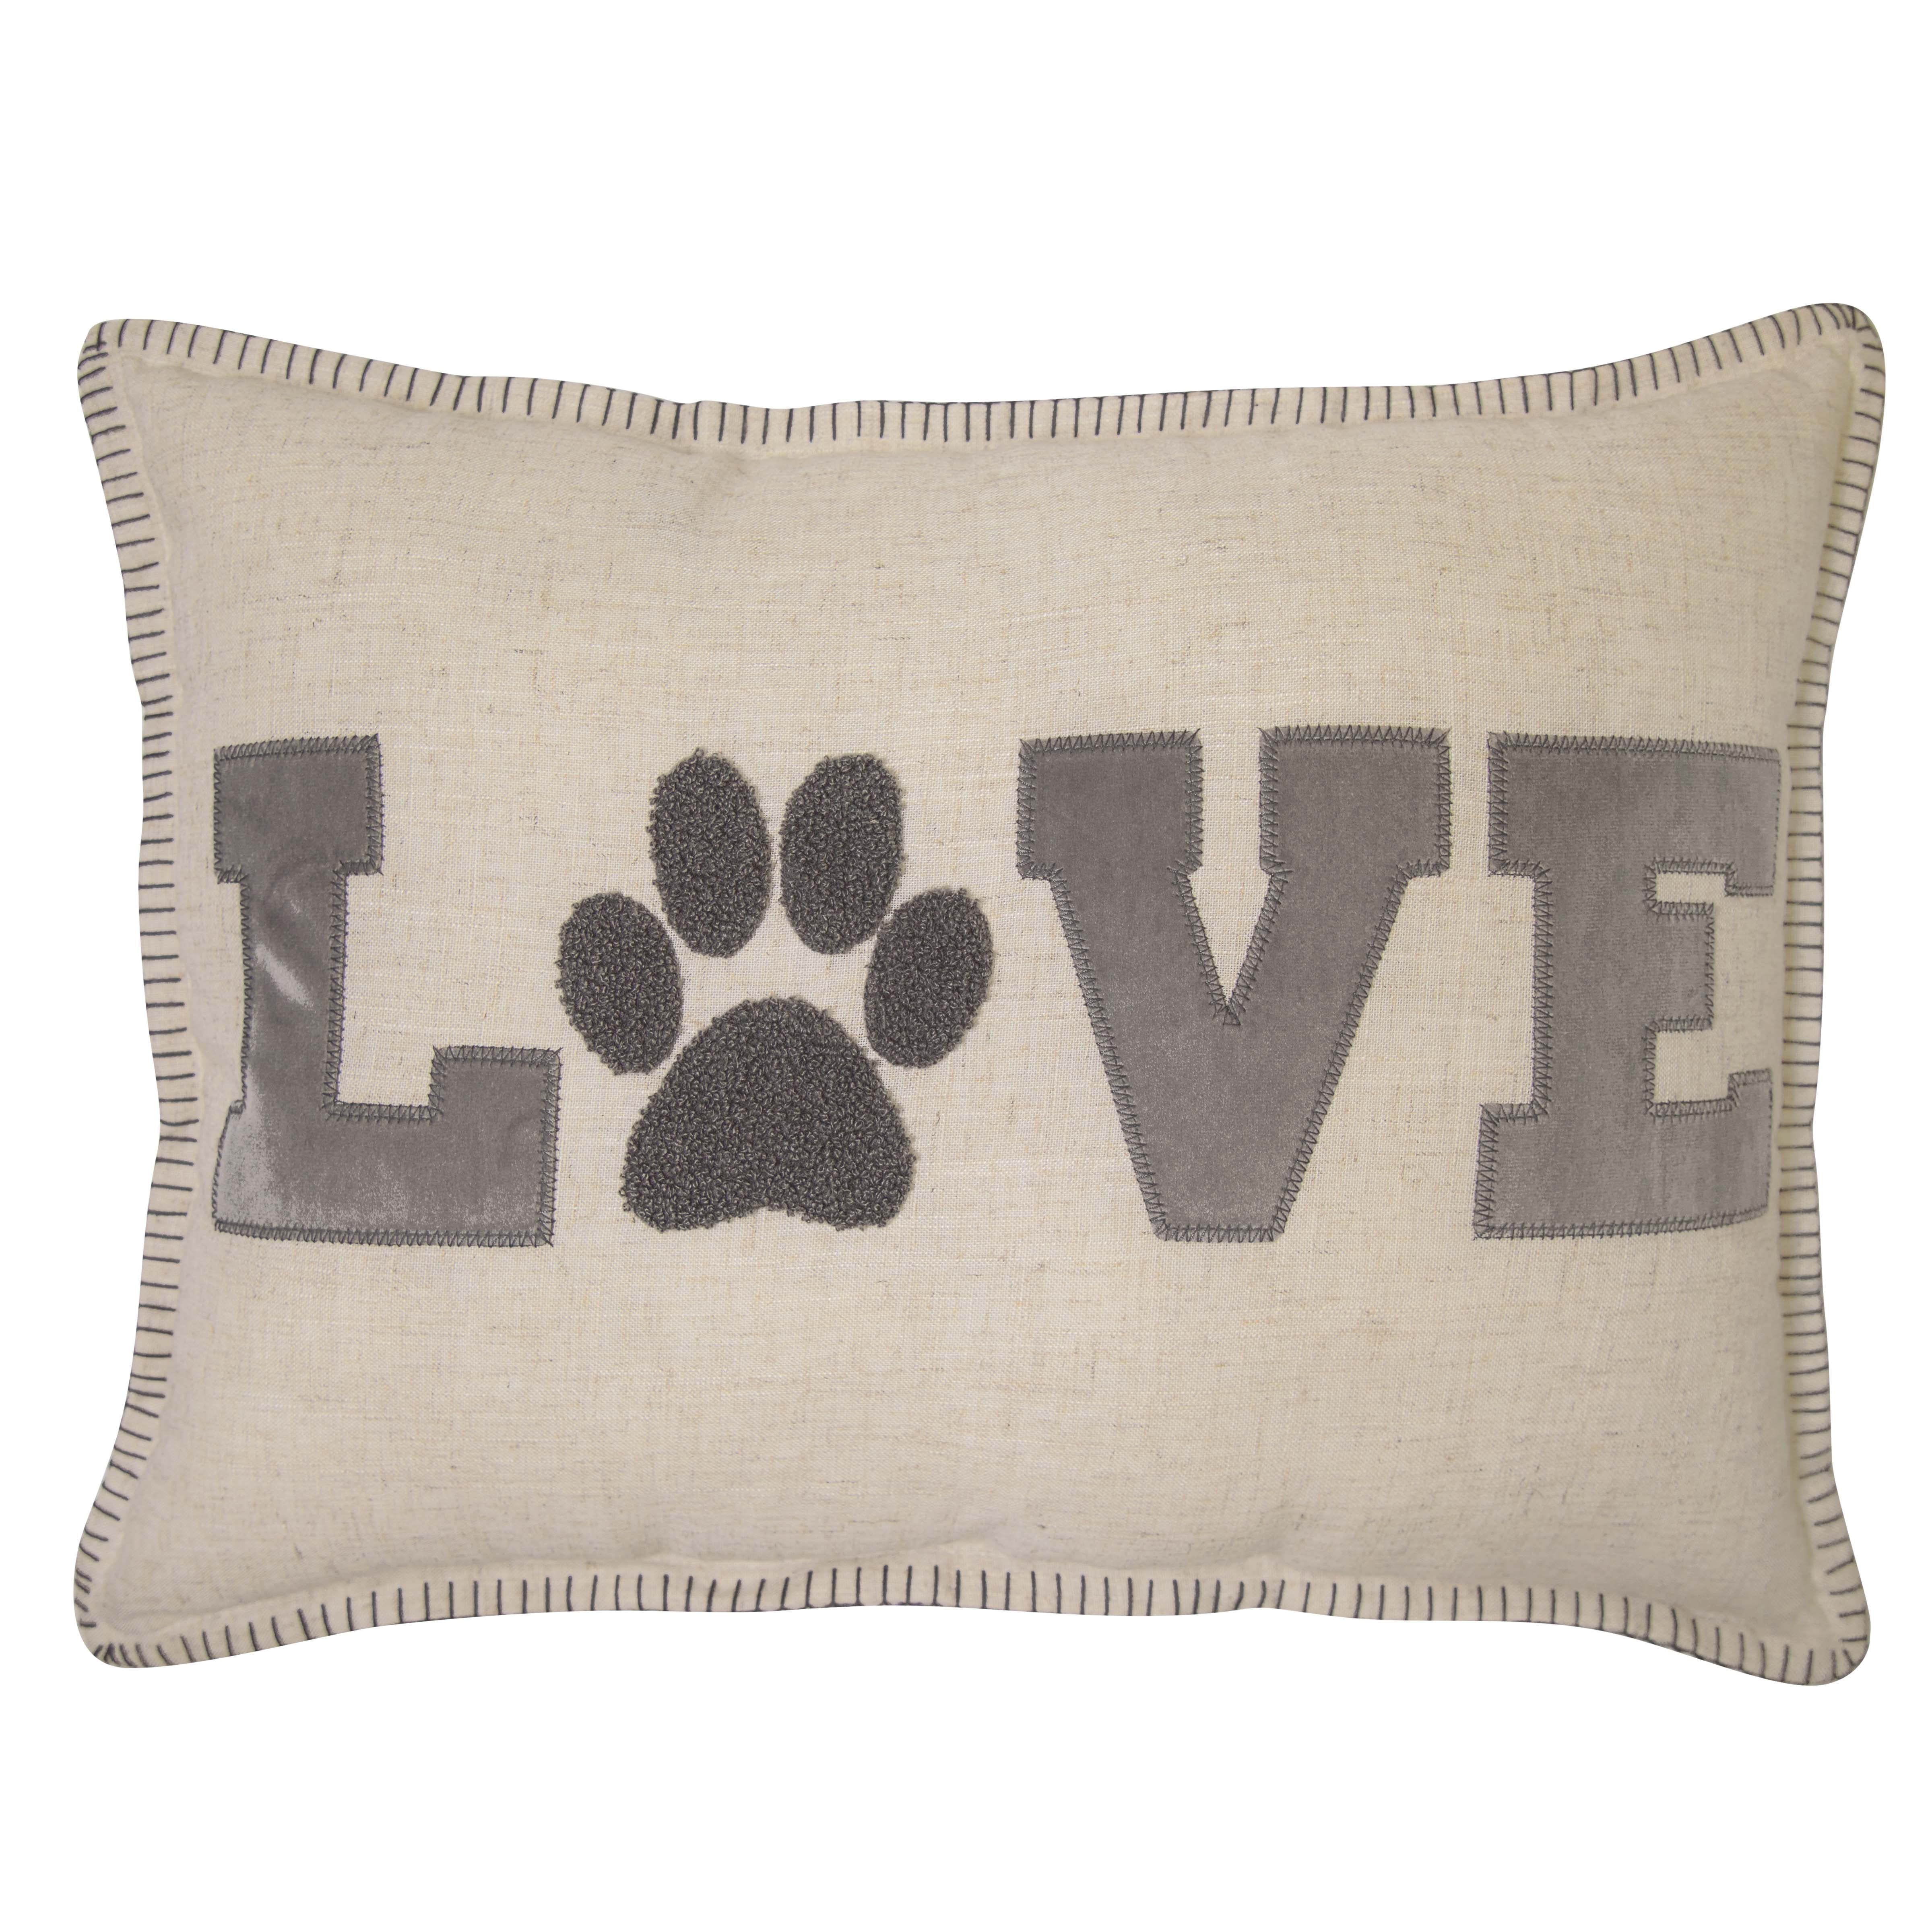 Better Homes & Gardens Decorative Throw Pillow, Paws for Love , Oblong,  Tan, 14 x 20, 1Pack 